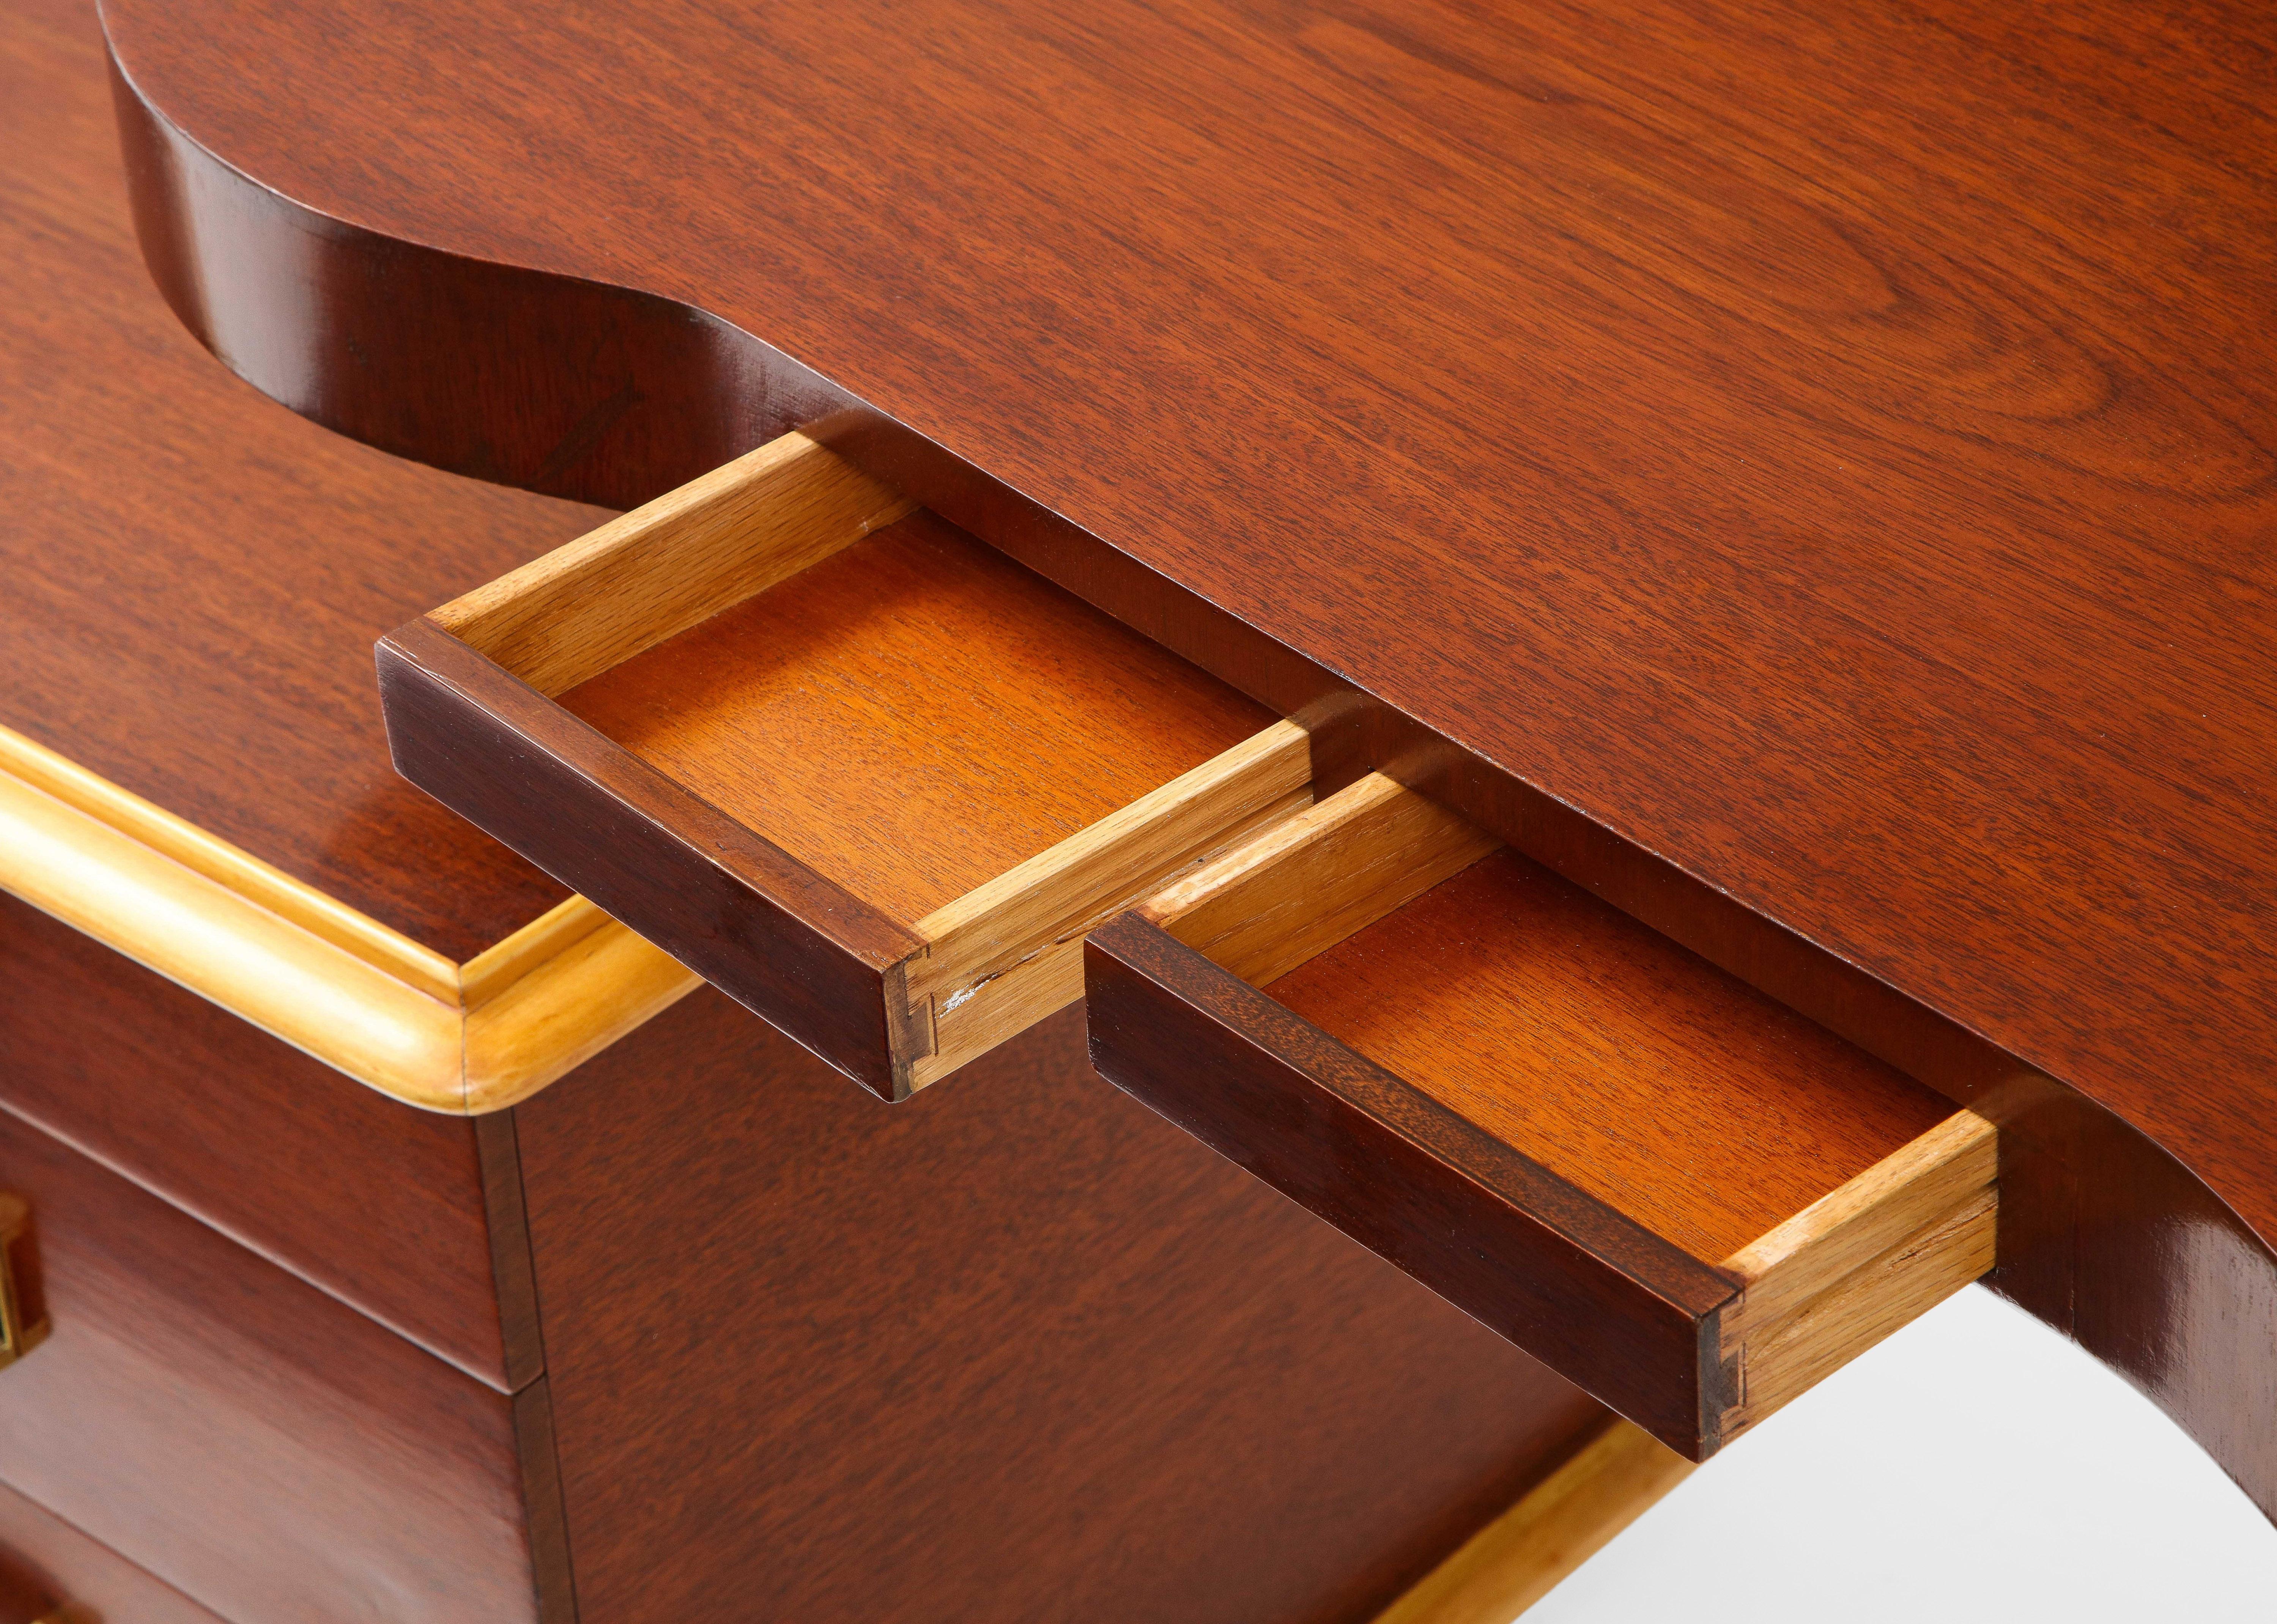 Paul Frankl Rare Kidney Desk in Mahogany, Birch, Leather and Brass, USA, 1950s For Sale 8